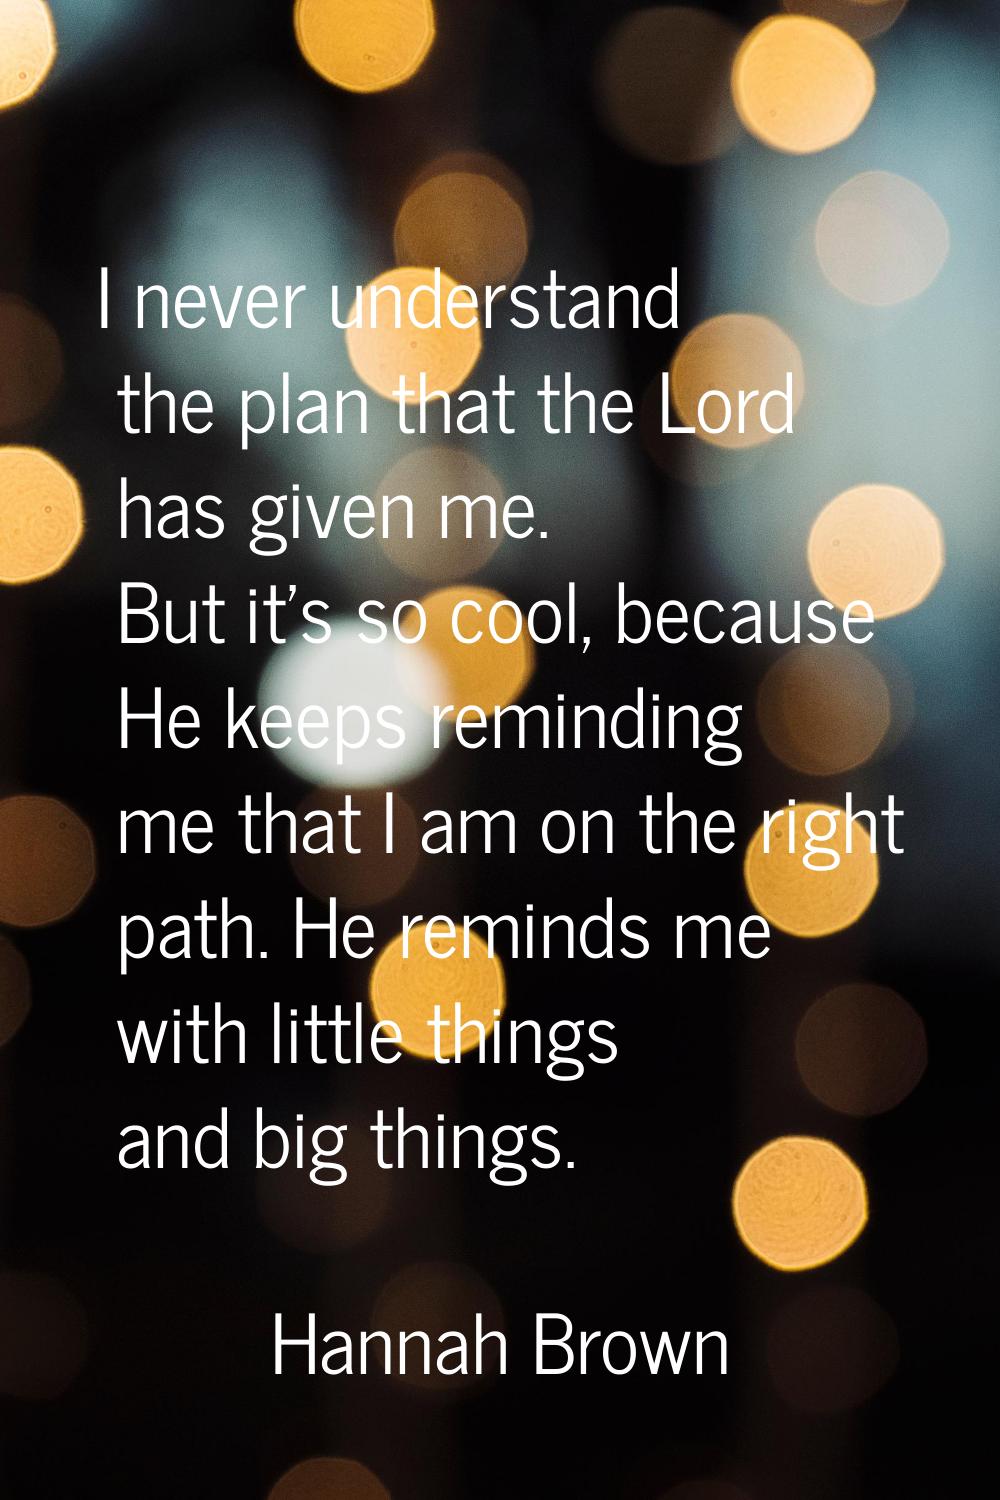 I never understand the plan that the Lord has given me. But it's so cool, because He keeps remindin